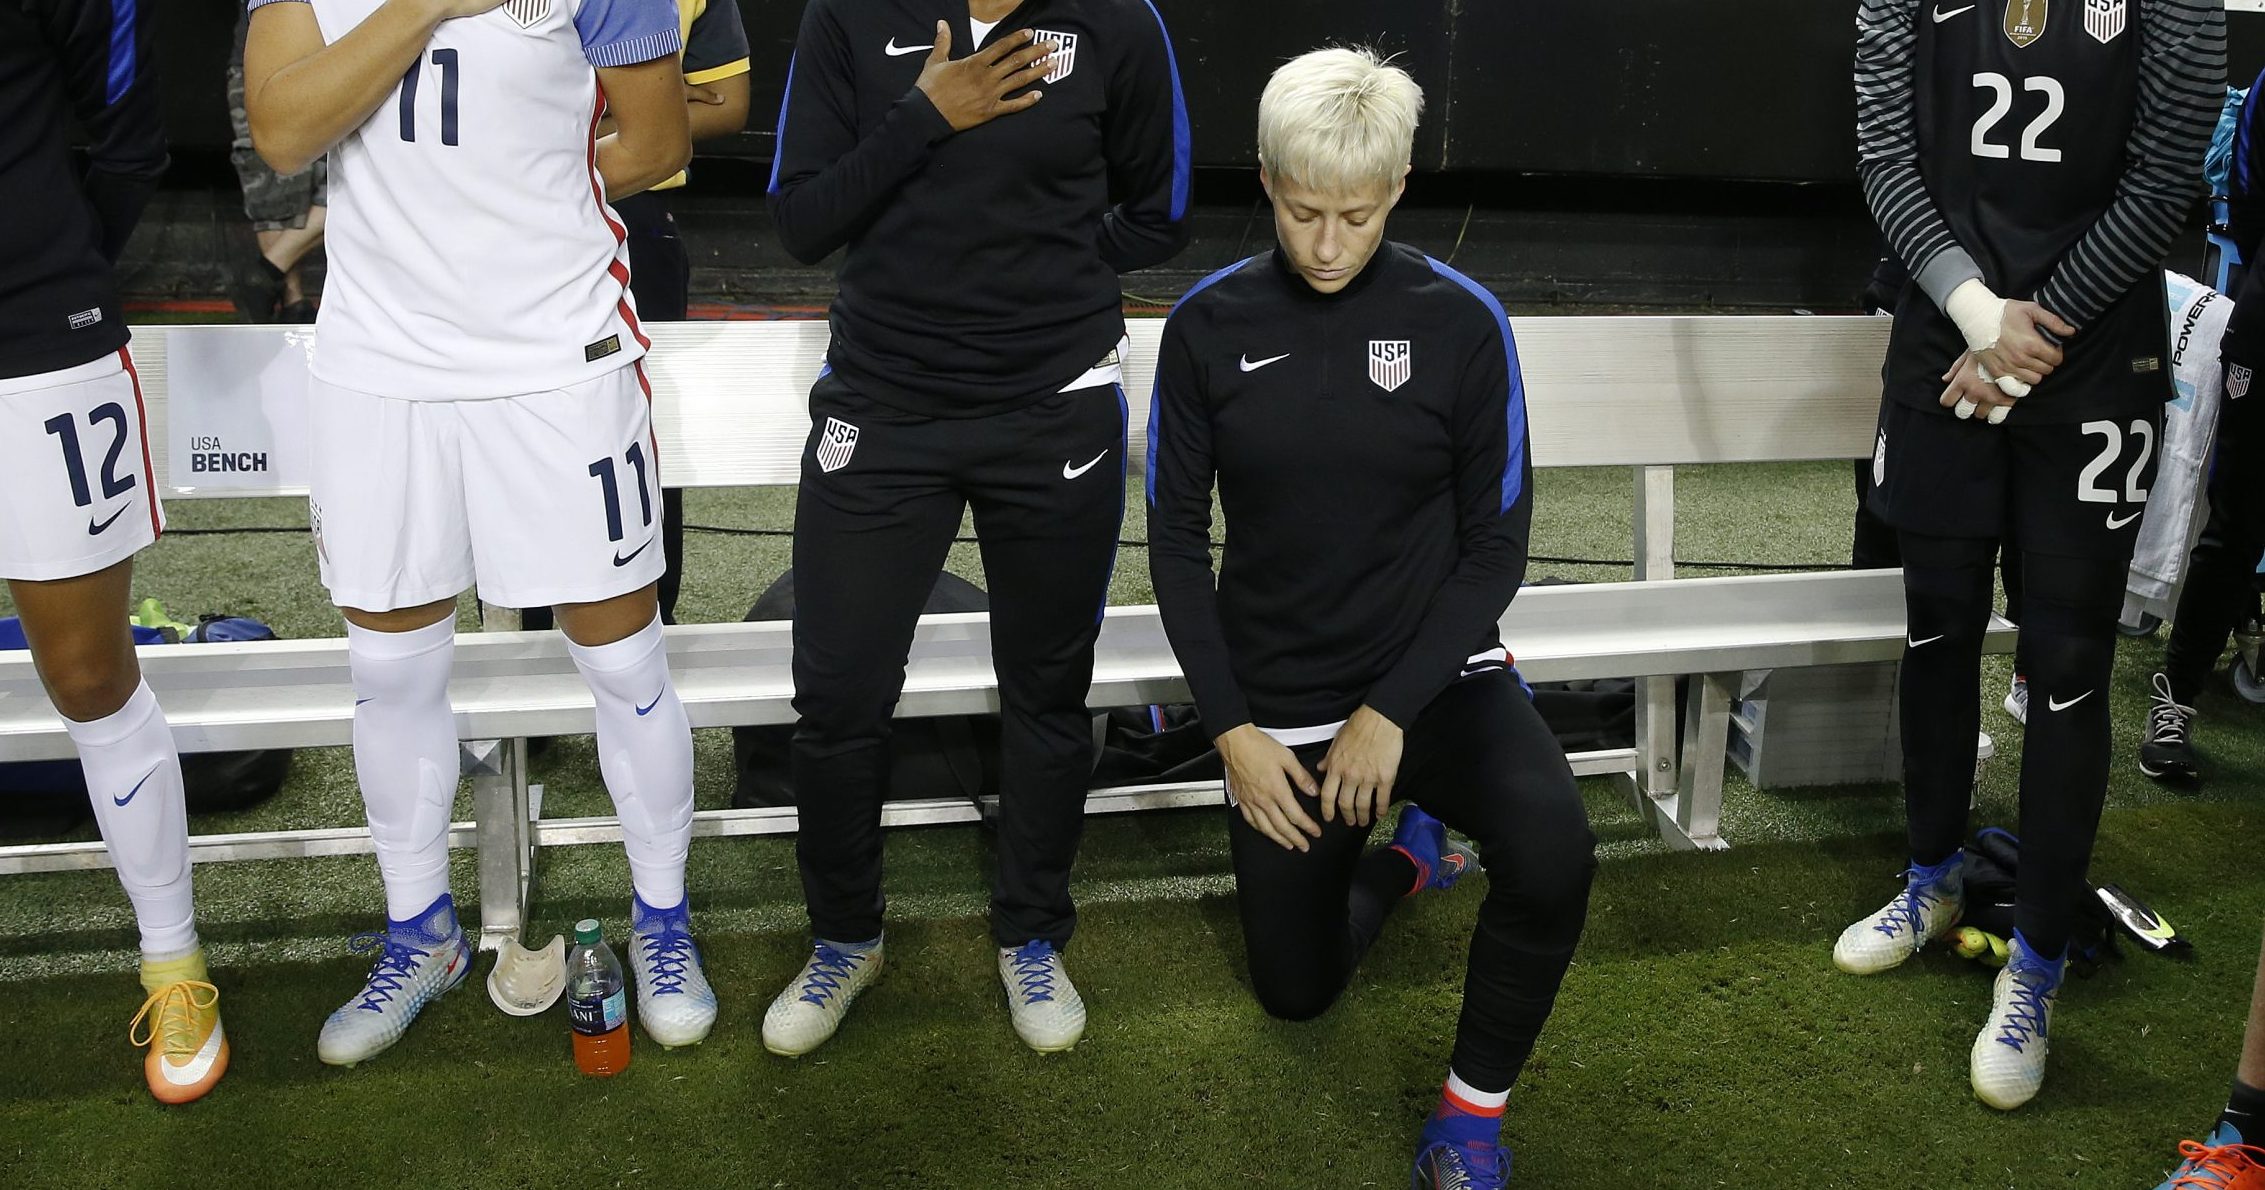 Megan Rapinoe kneels next to her U.S. teammates as the national anthem is played before the team's exhibition soccer match against the Netherlands in Atlanta on Sept. 18, 2016.